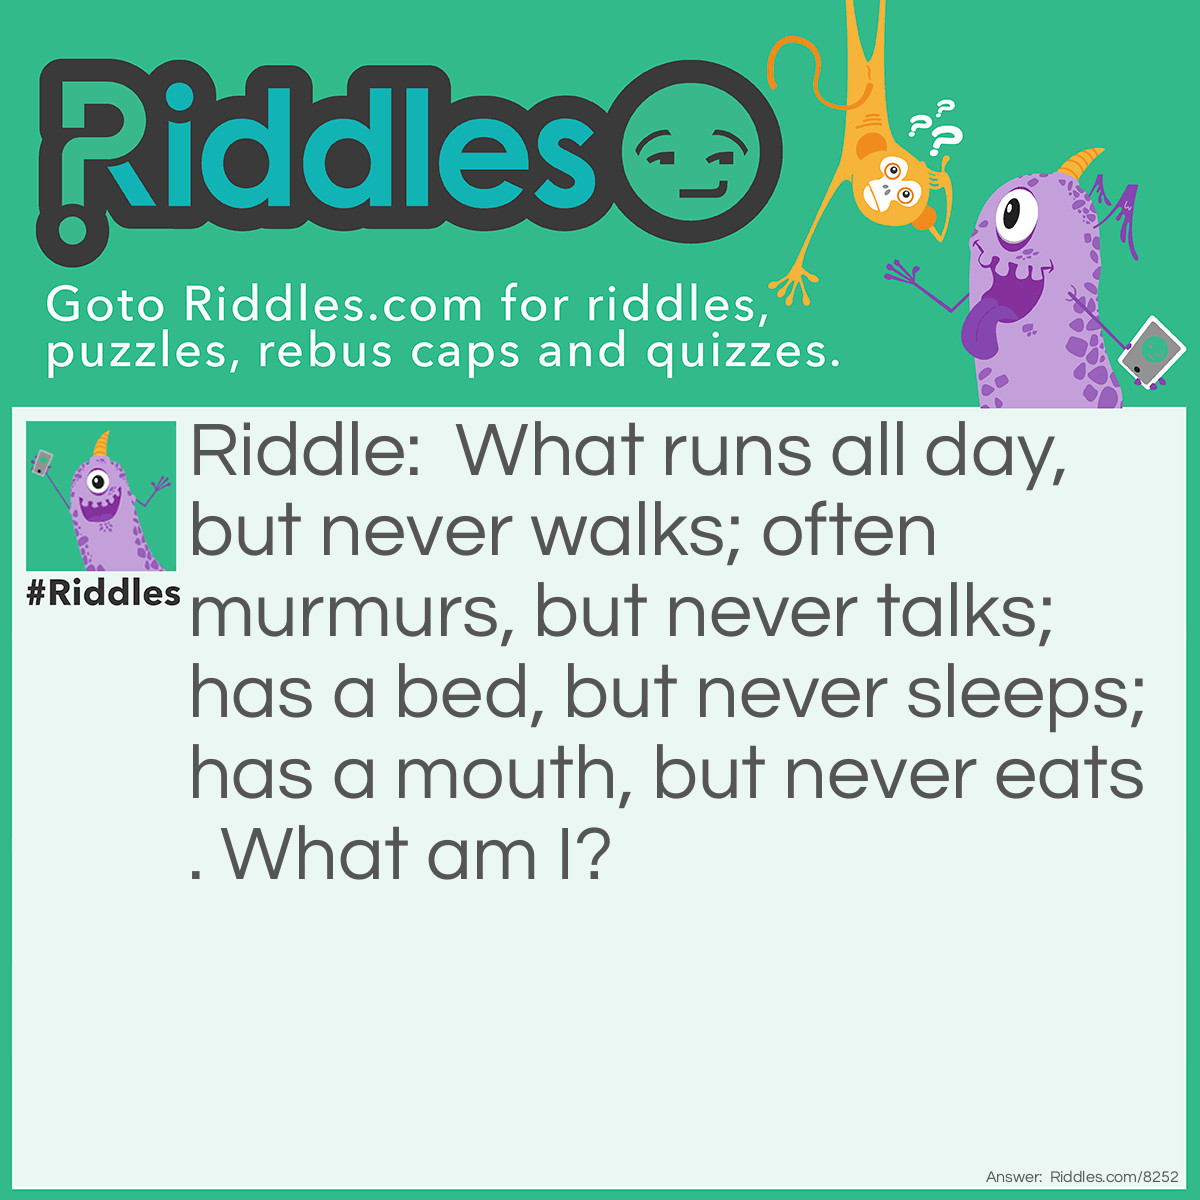 Riddle: What runs all day, but never walks; often murmurs, but never talks; has a bed, but never sleeps; has a mouth, but never eats. What am I? Answer: A river.